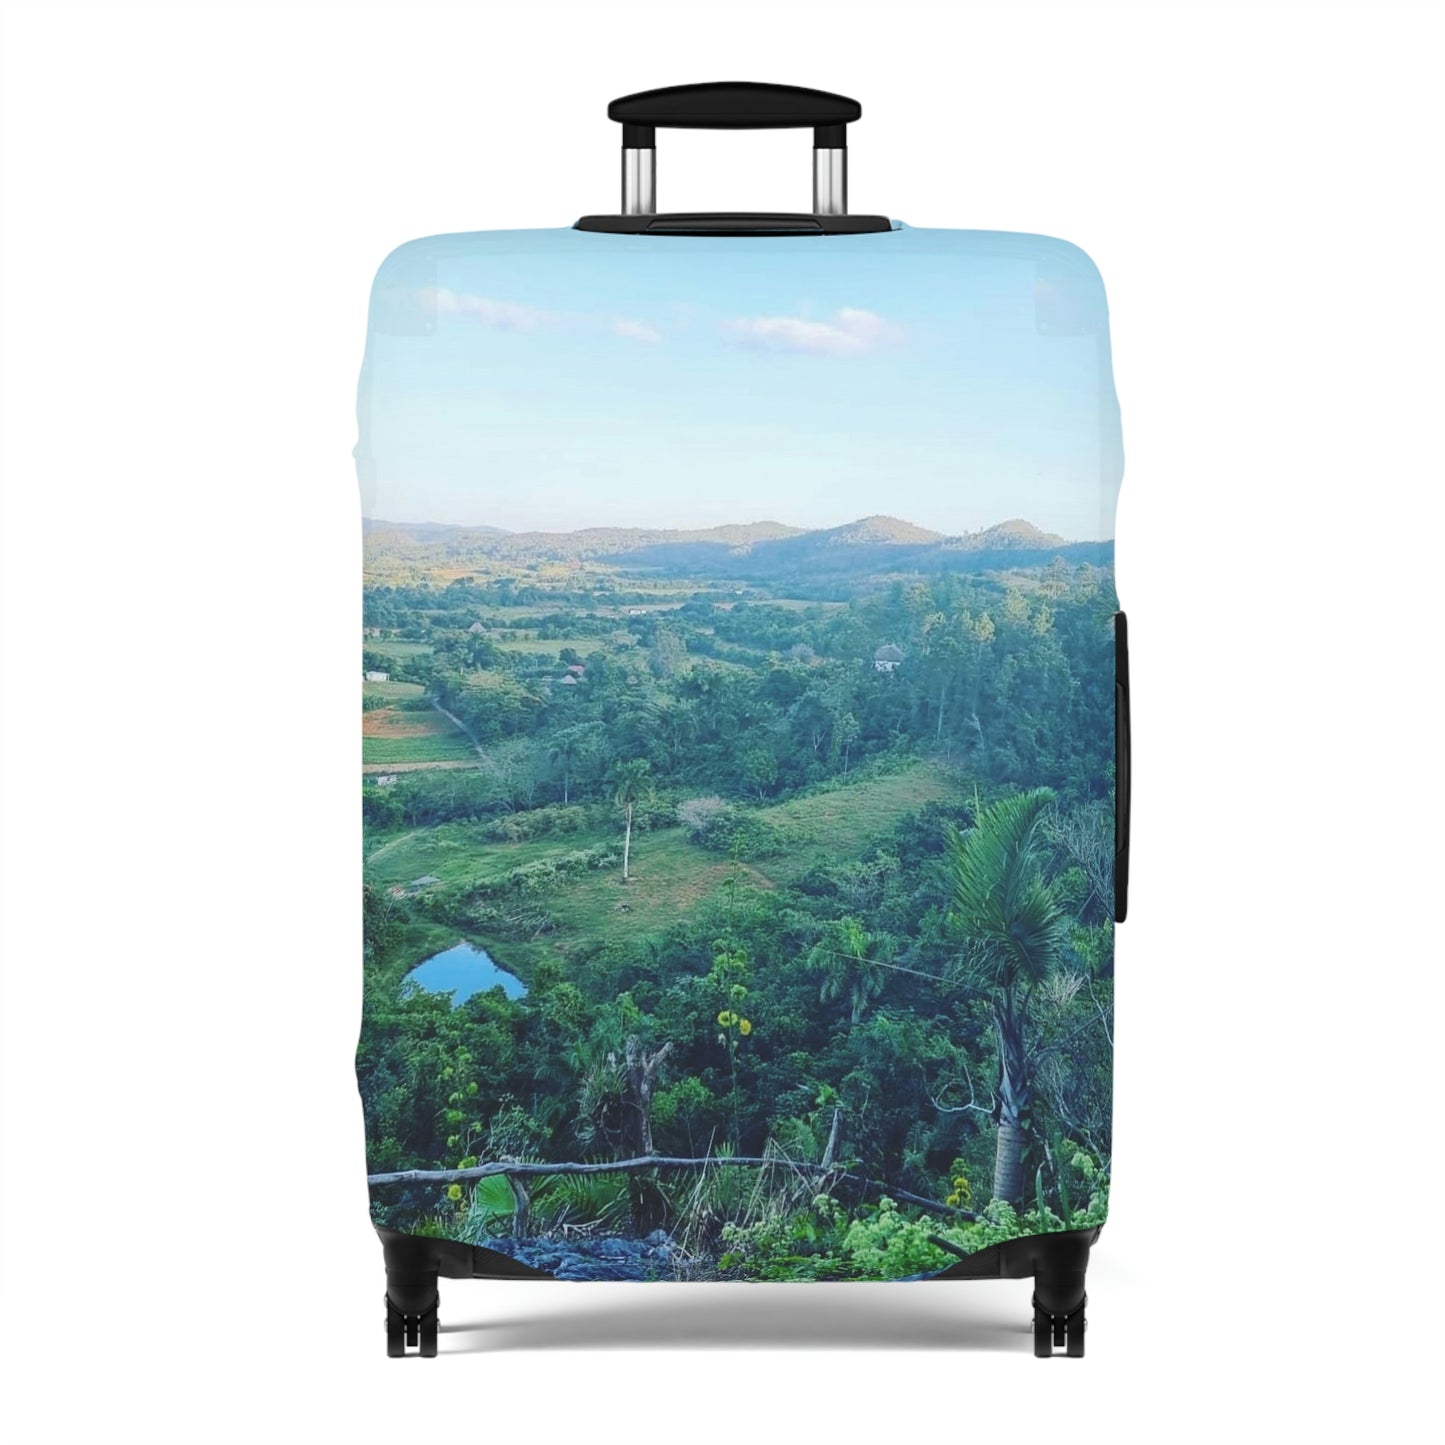 Viñales from above | Cuba | Luggage Cover